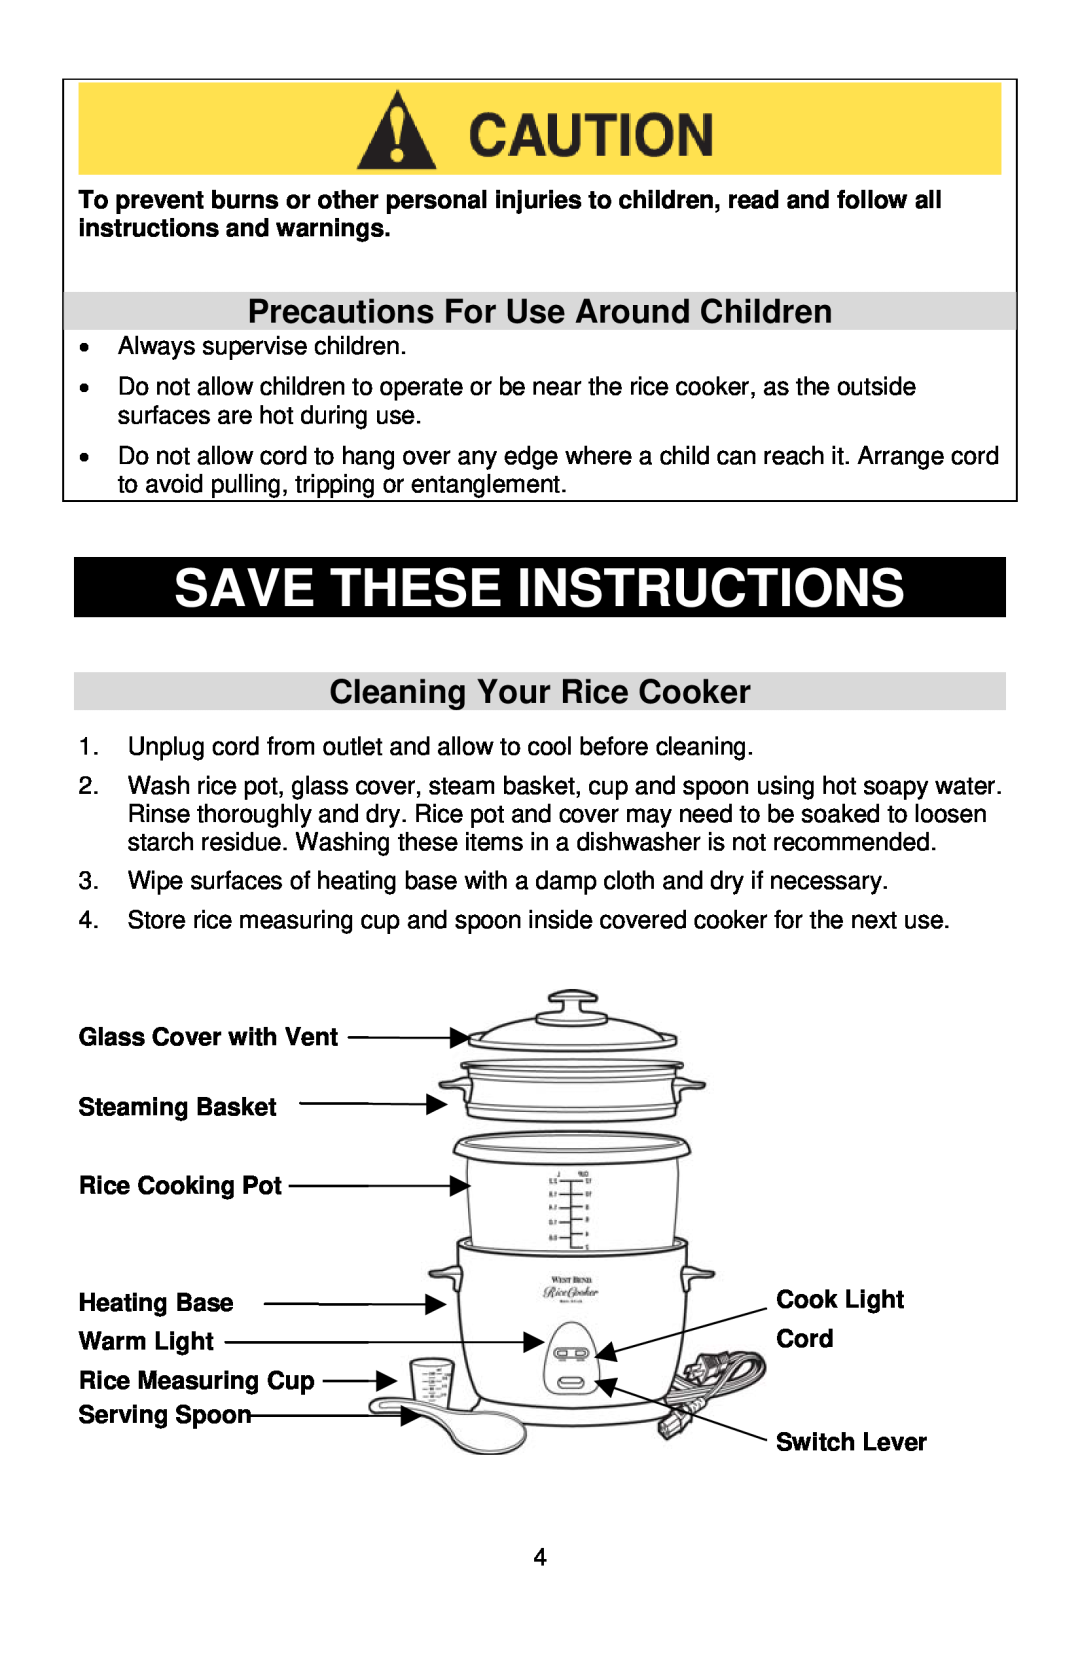 West Bend 12-Cup Automatic Rice Cooker Save These Instructions, Precautions For Use Around Children, Rice Cooking Pot 